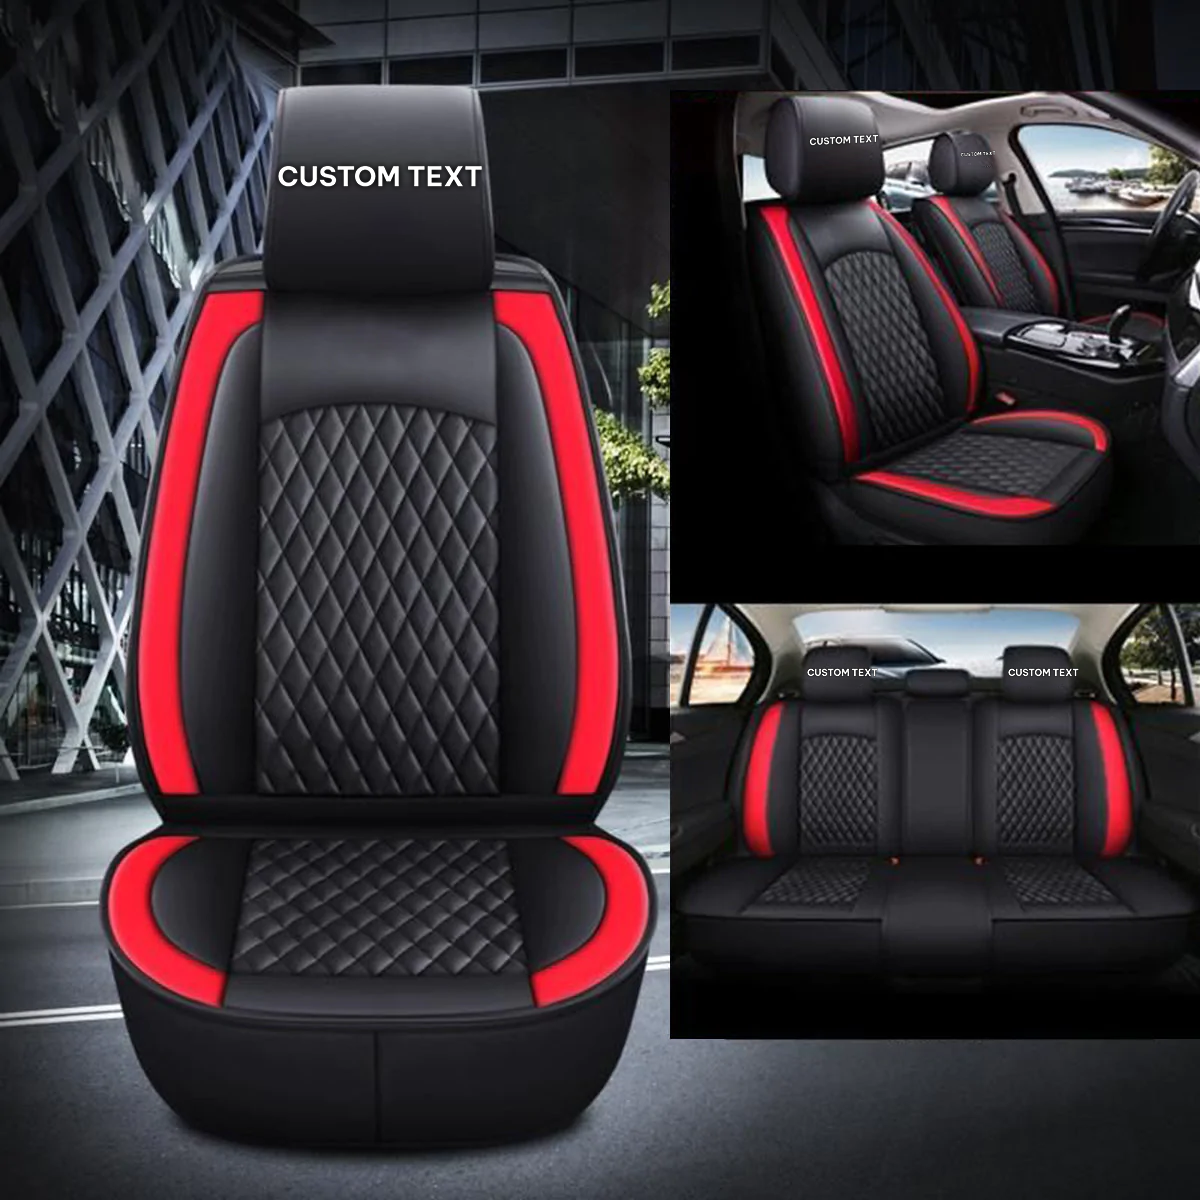 Custom Text For Seat Covers 5 Seats Full Set, Custom Fit For Your Cars, Leatherette Automotive Seat Cushion Protector Universal Fit, Vehicle Auto Interior Decor IN13988